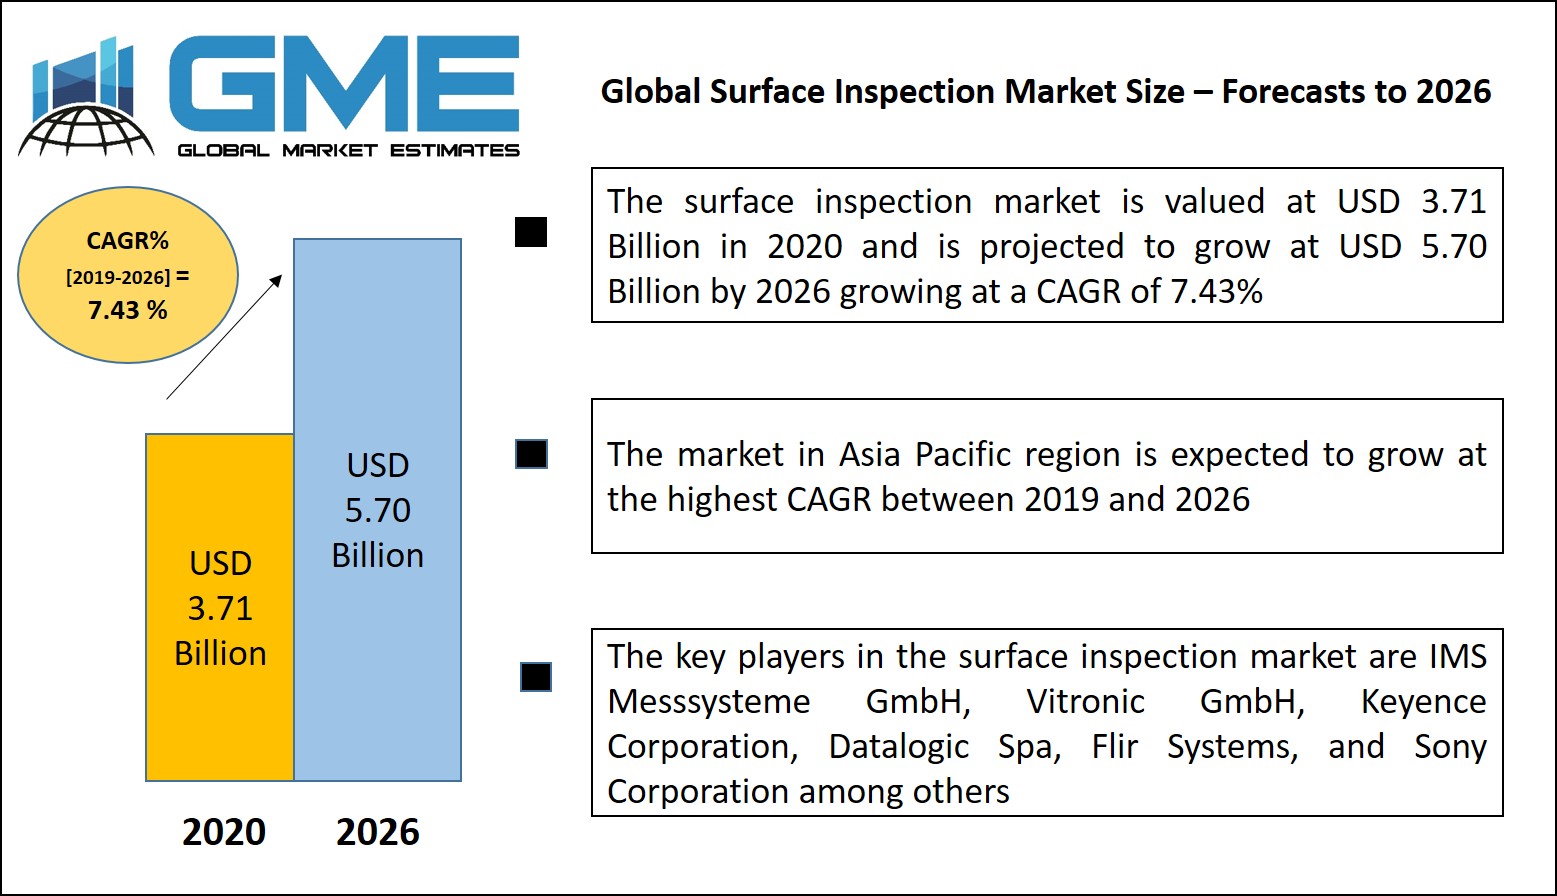 Global Surface Inspection Market Size – Forecasts to 2026